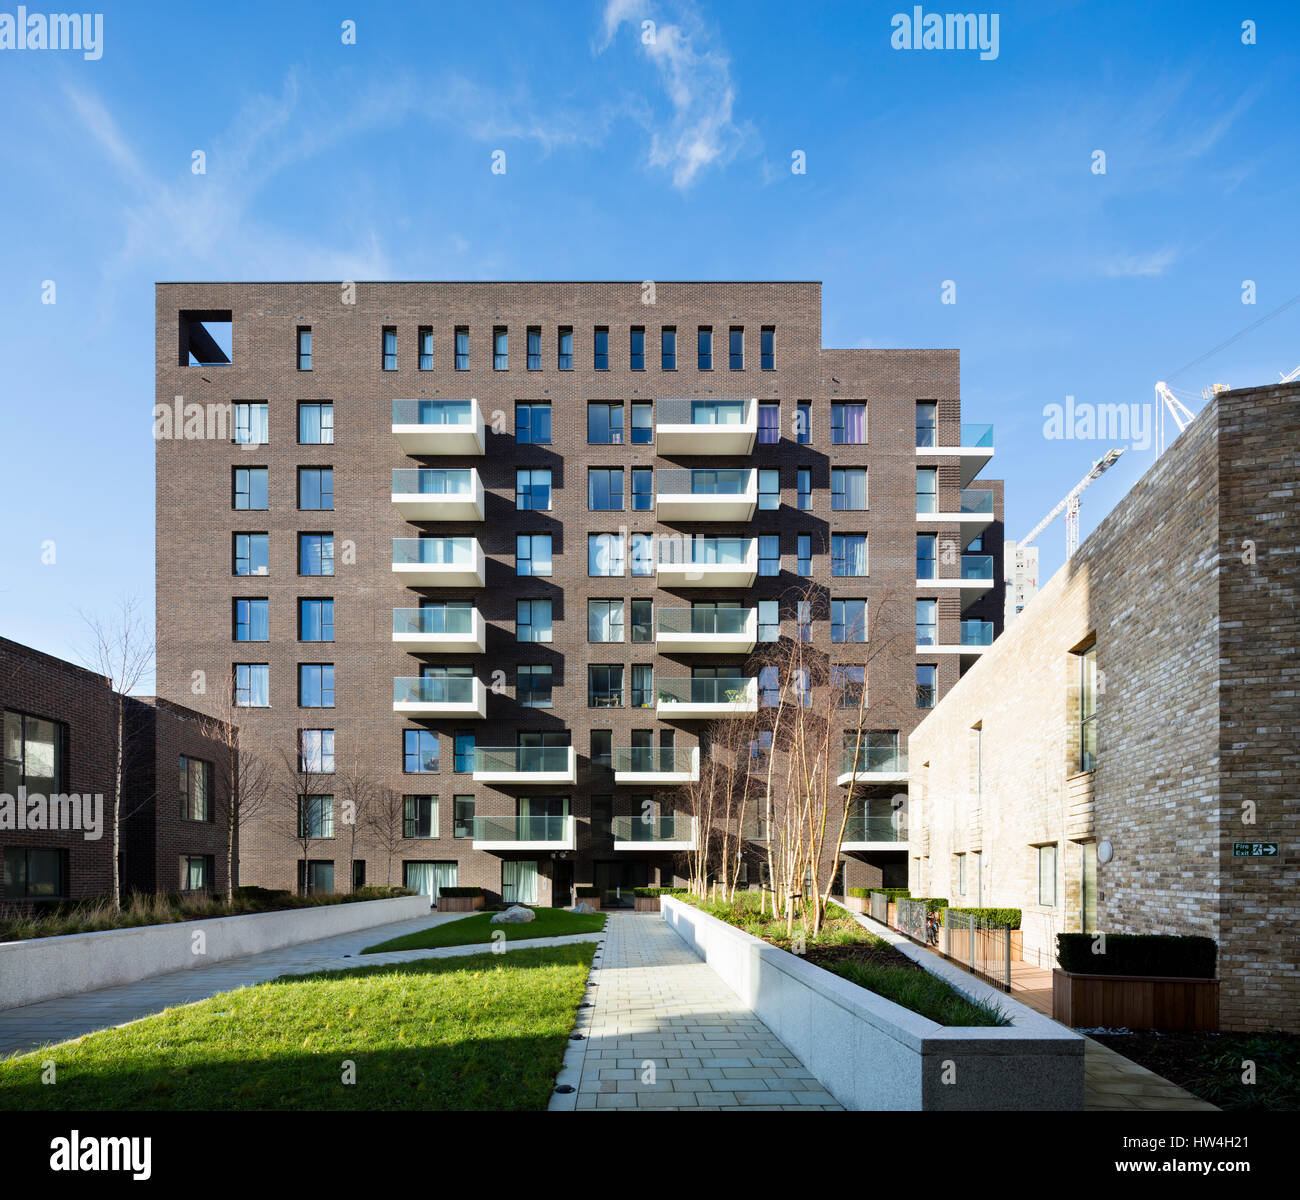 Exterior view of a building of the Greenwich Peninsular development and regeneration program, London, UK. Stock Photo